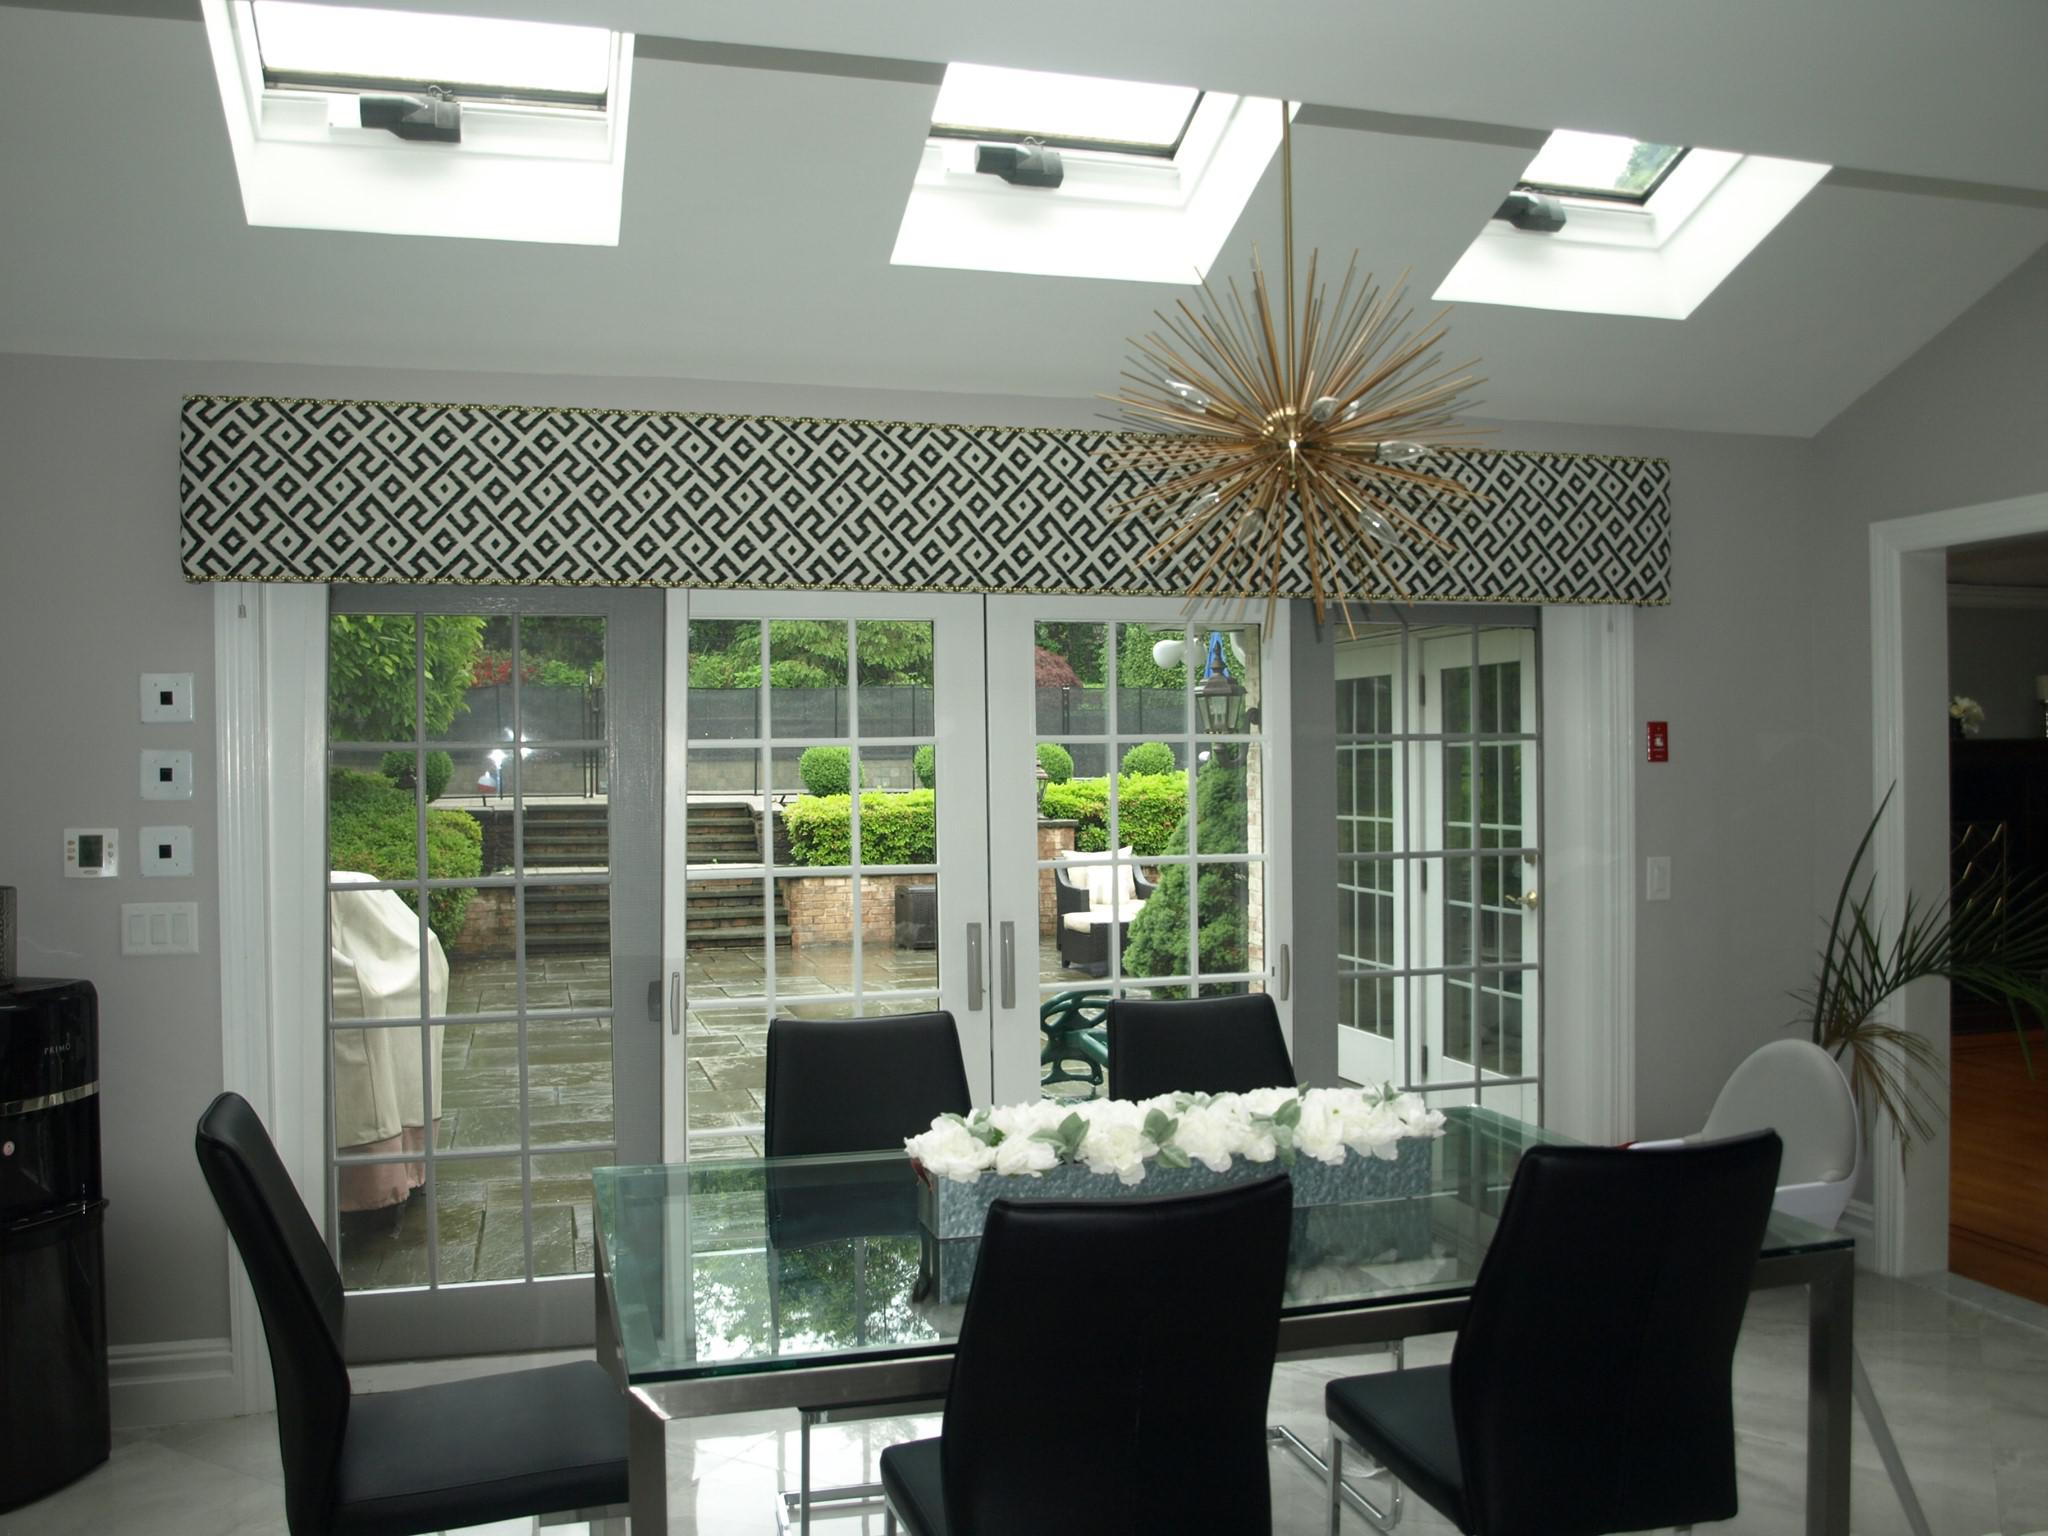 Patio doors and skylights in La Jolla can brighten up any room. However, that alone can leave something to be desired...but what? A custom cornice in the perfect pattern is your answer! Call Budget Blinds of Point Loma for your finishing touch!  BudgetBlindsOfPointLoma  FreeConsultation  WindowWedne